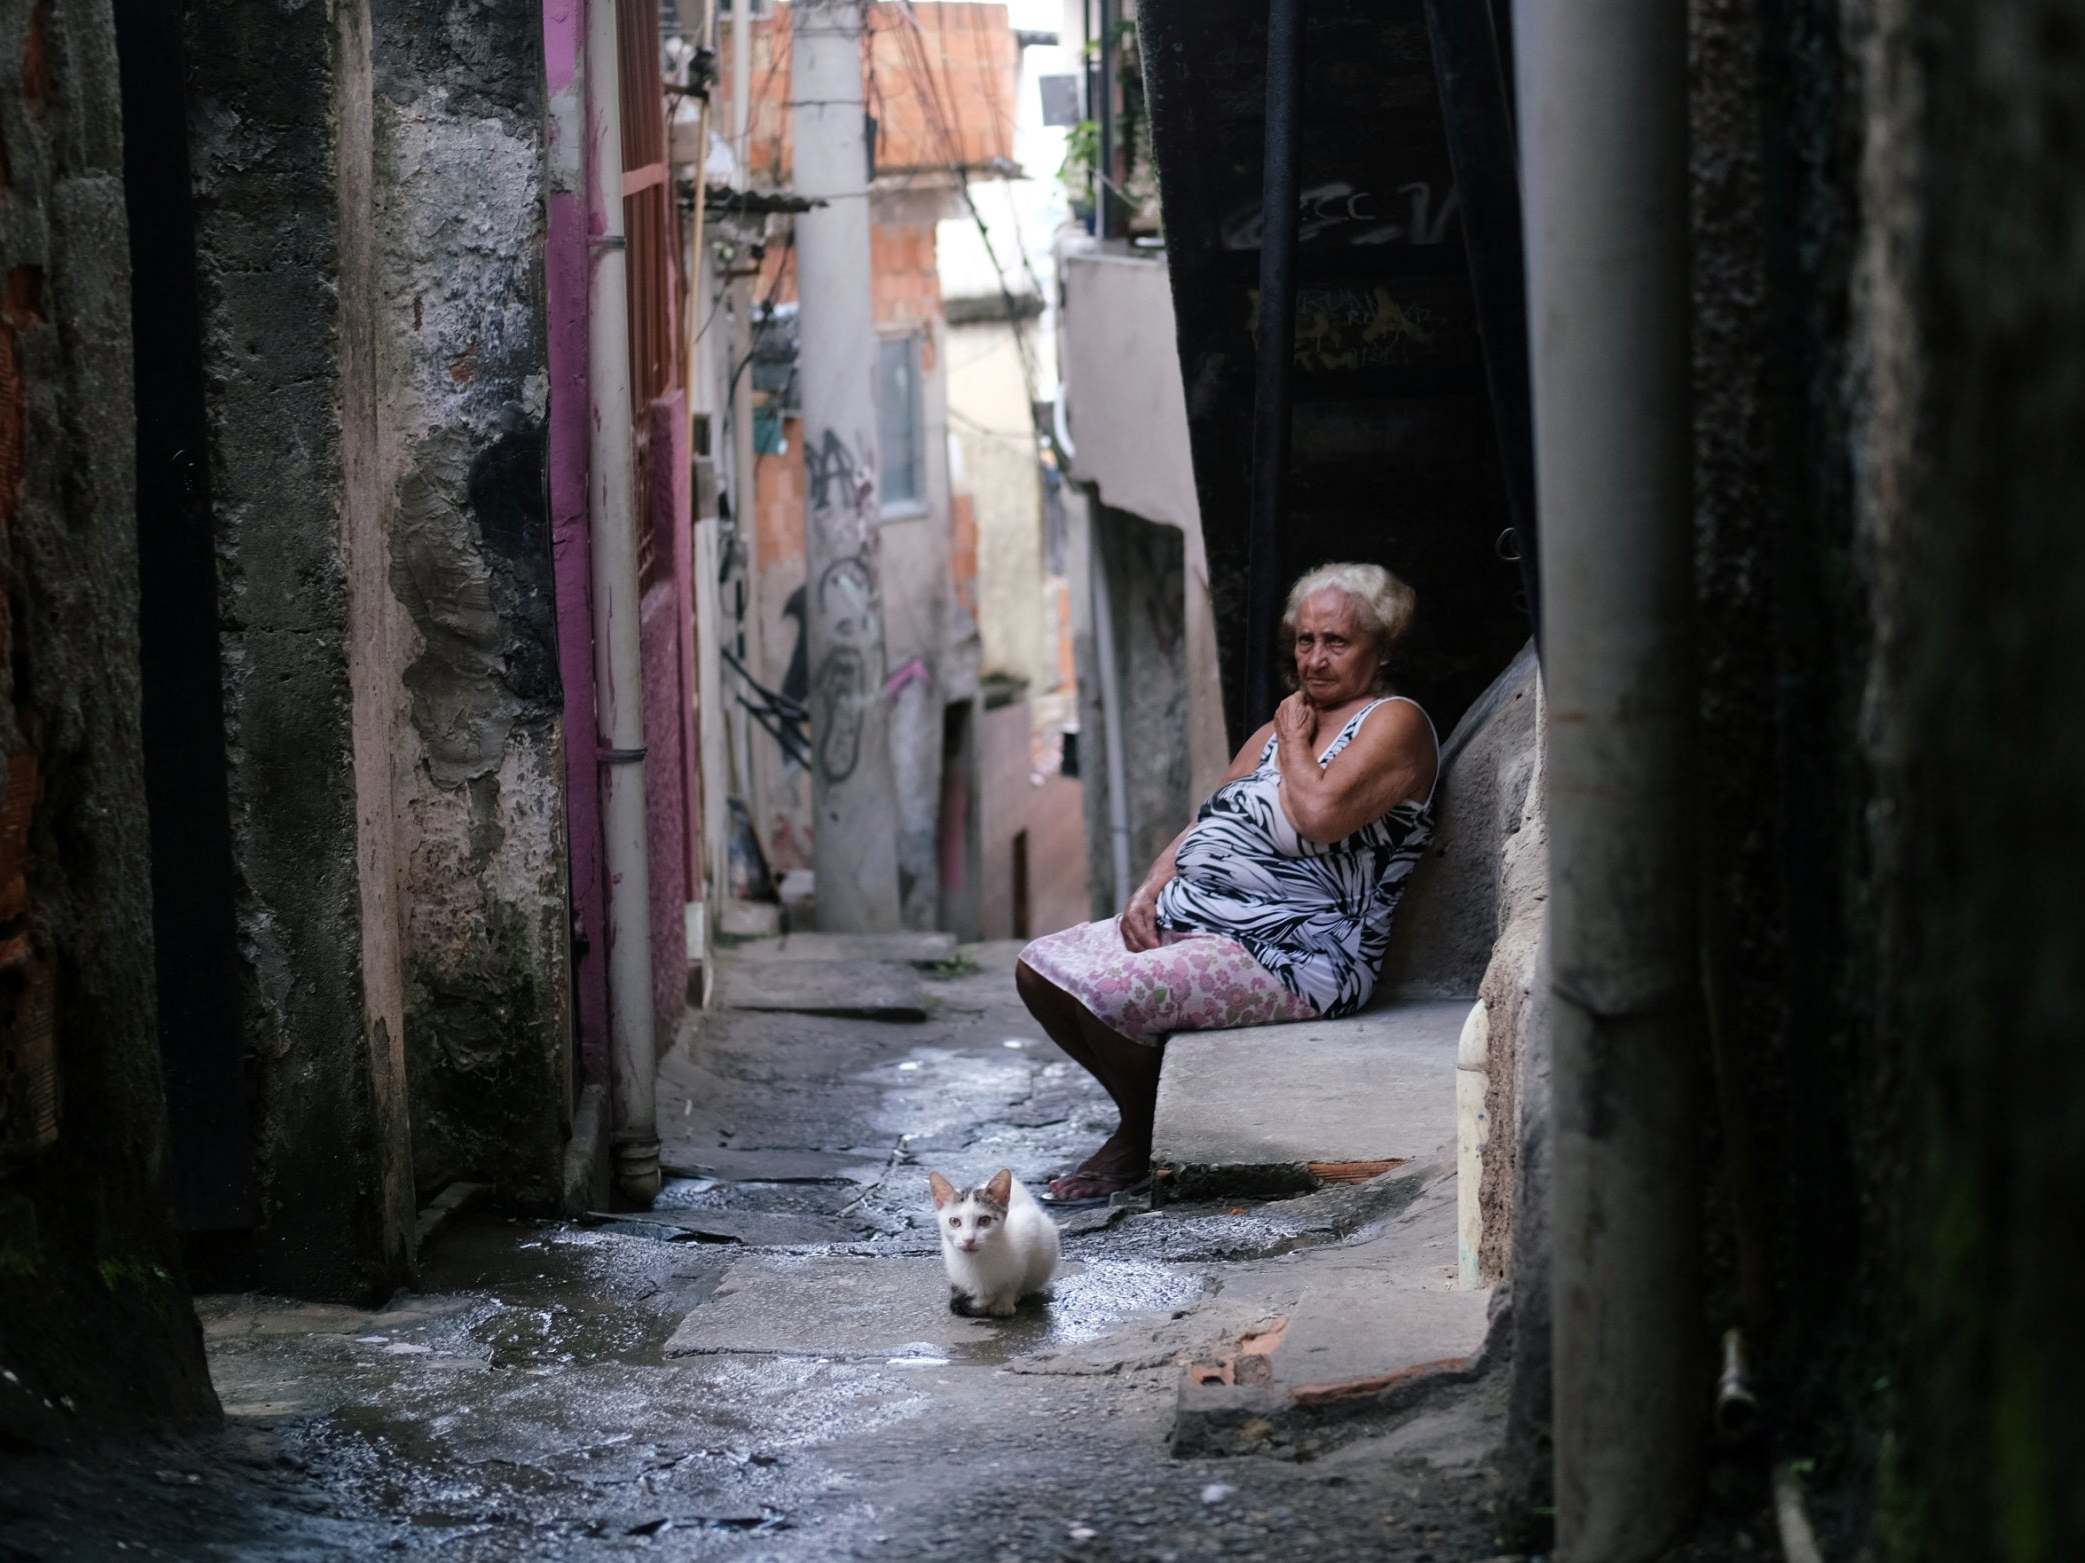 Maria das Neves, 76, cuts a lonely figure in Rio’s Alemao favela